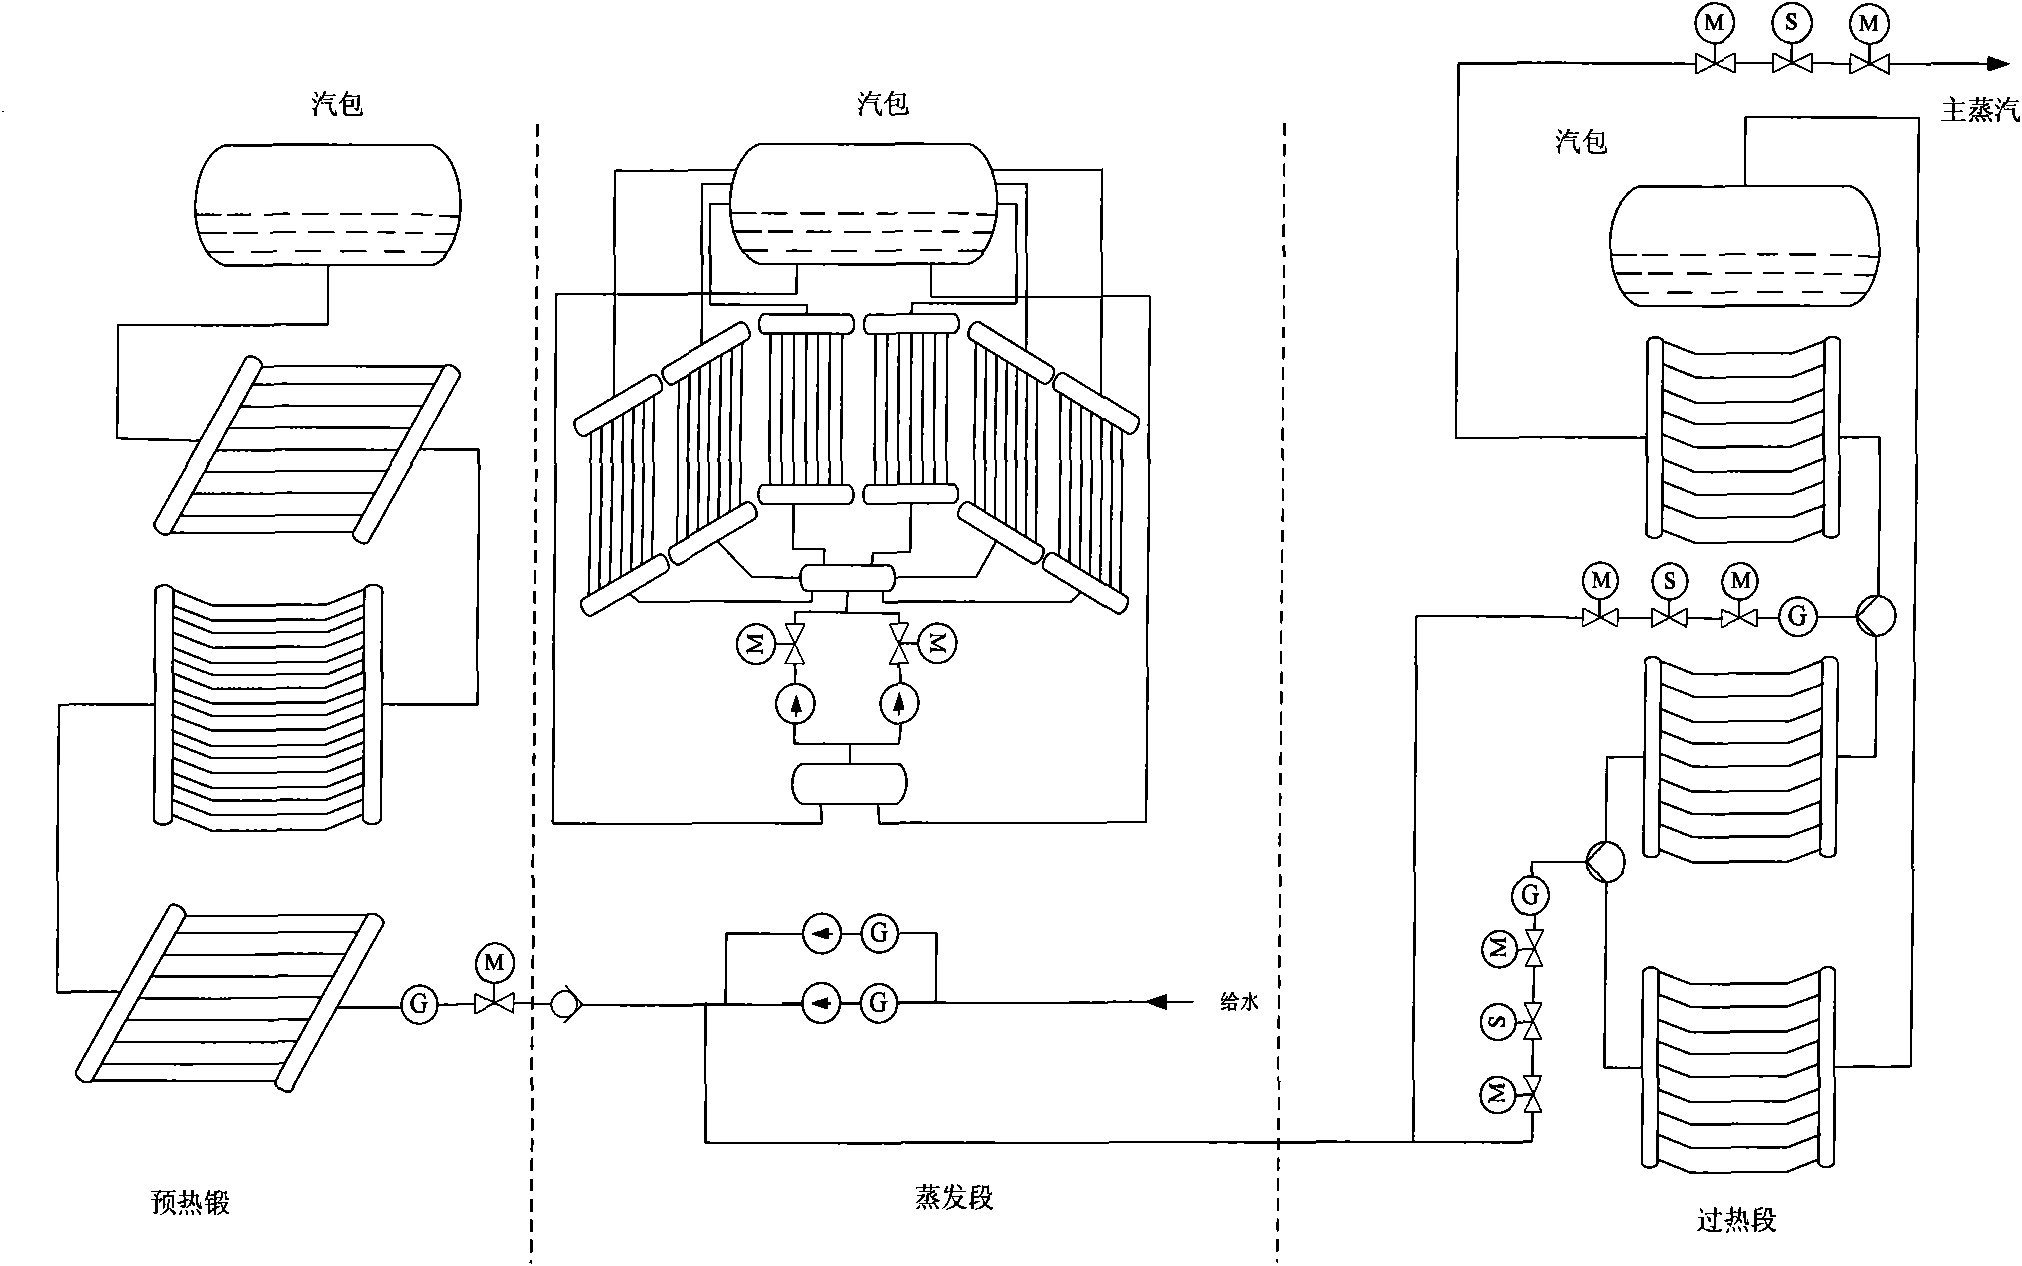 Solar-thermal power generation steam heat receiver control and equipment protection method and system